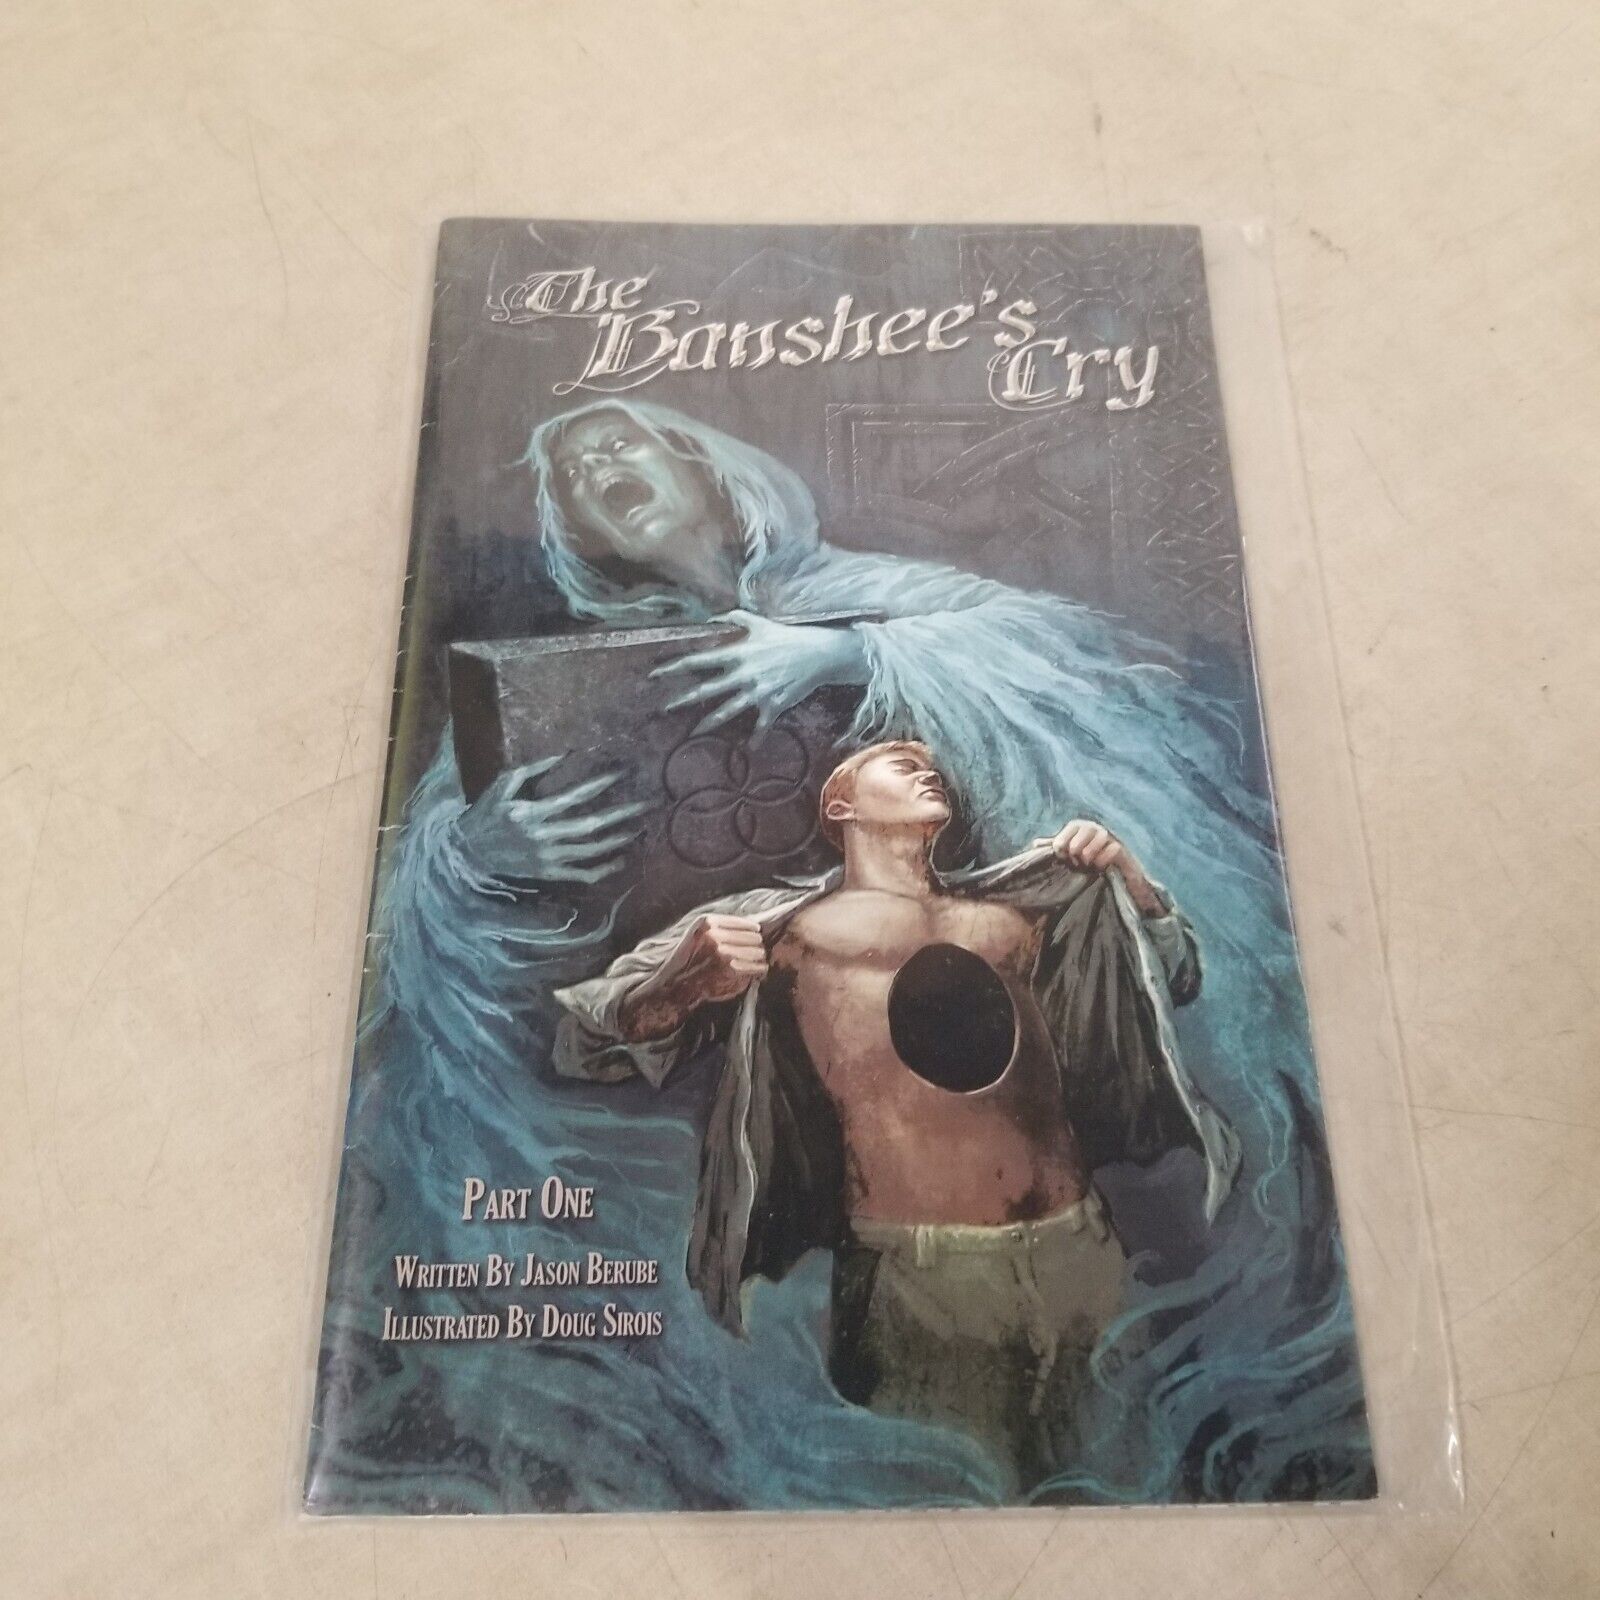 The Banshee's Cry Part One by Jason Berube. Illustrated by Doug Sirois